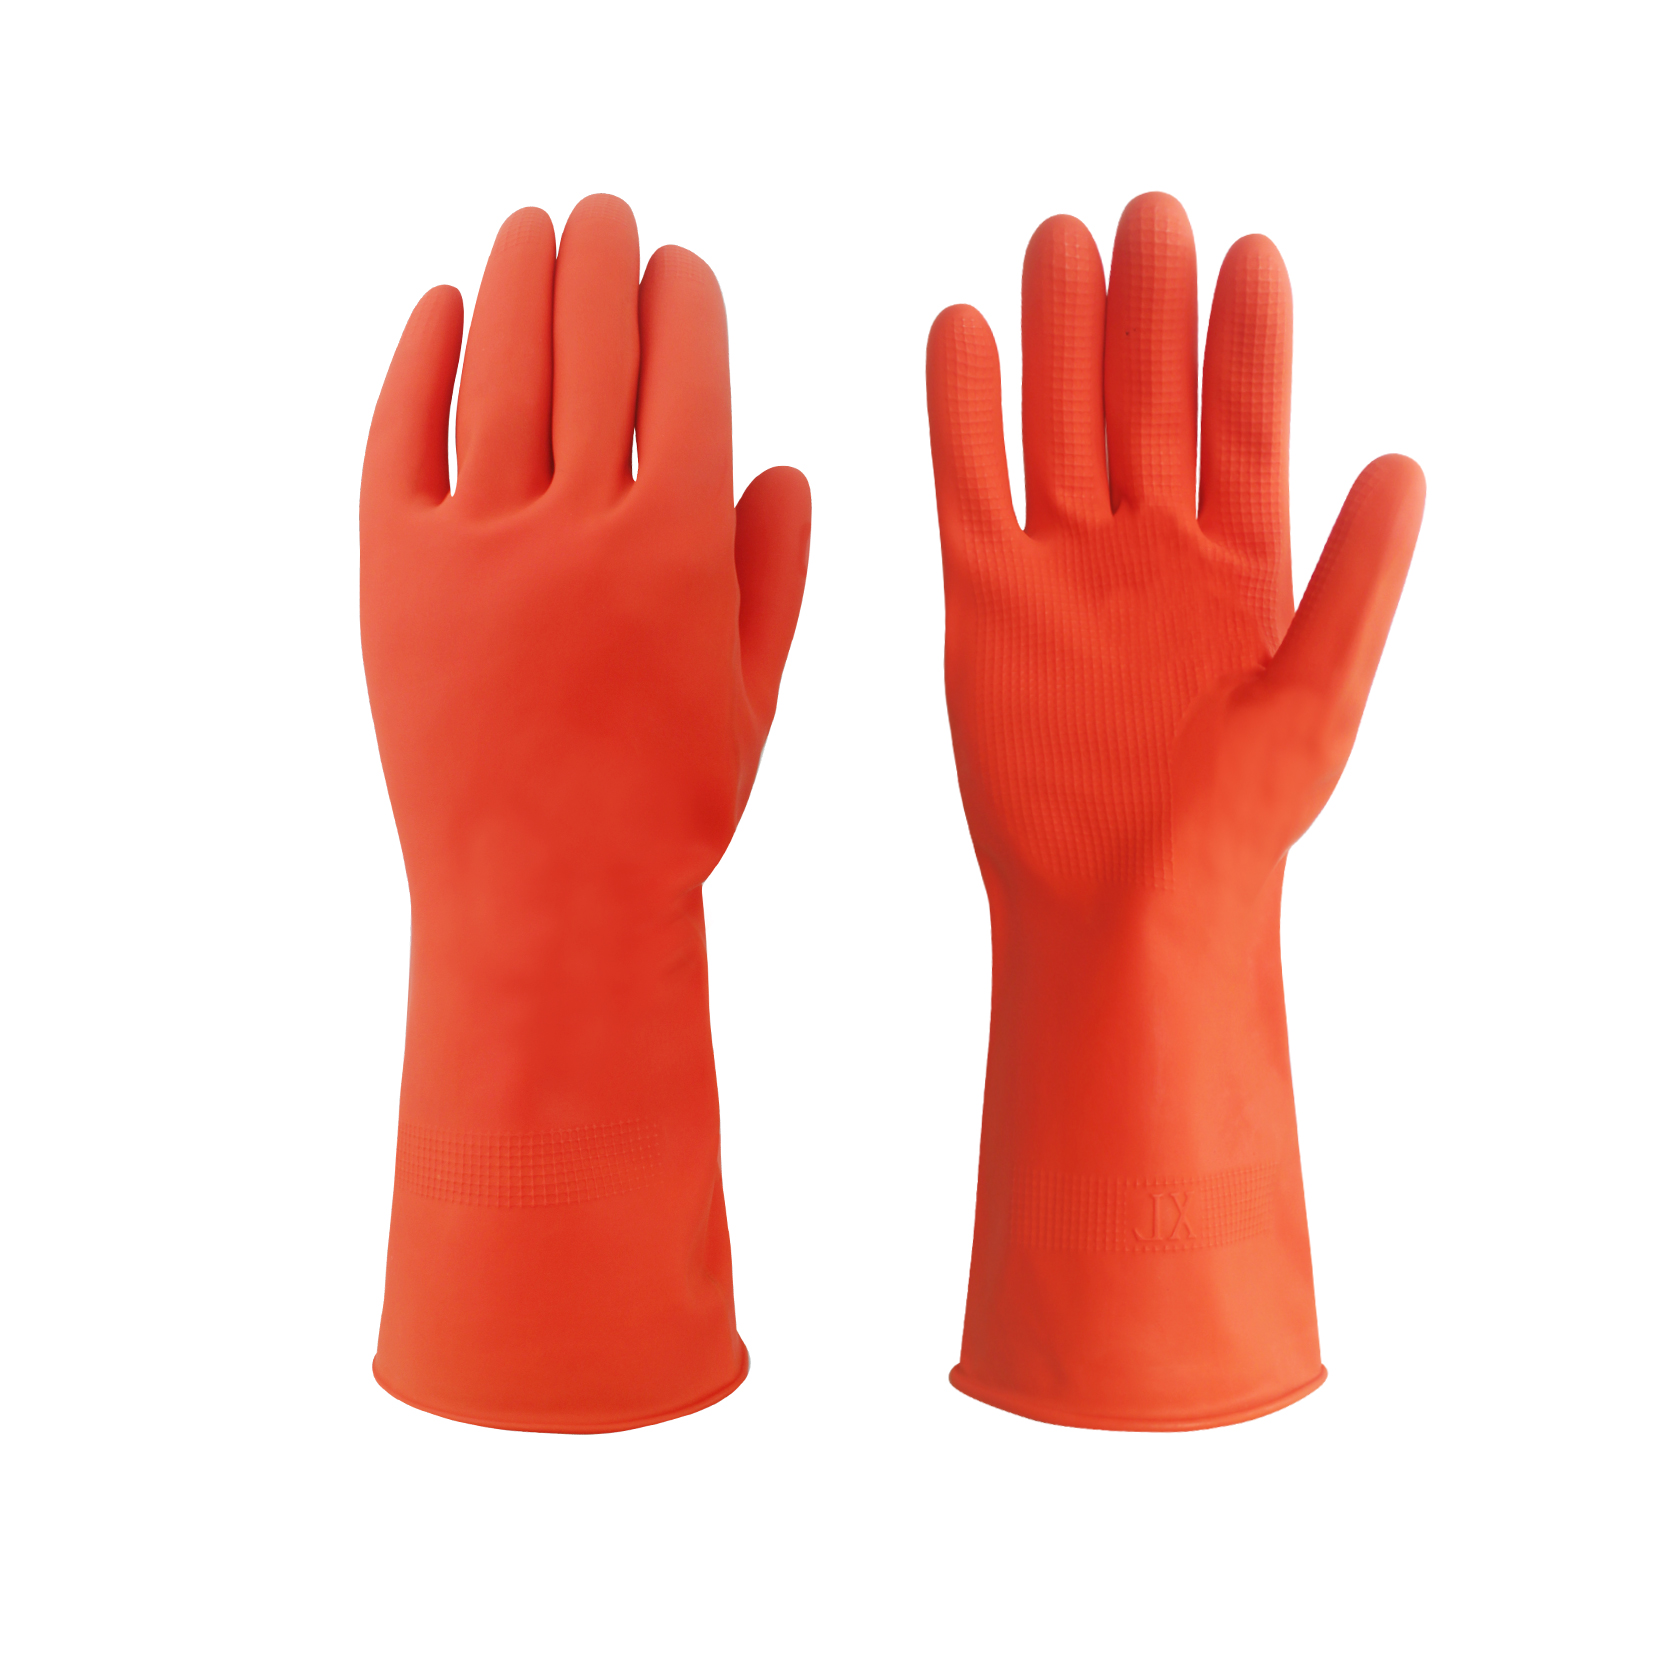 Household Cleaning Latex Gloves Kitchen Dishwashing Household Gloves (1)